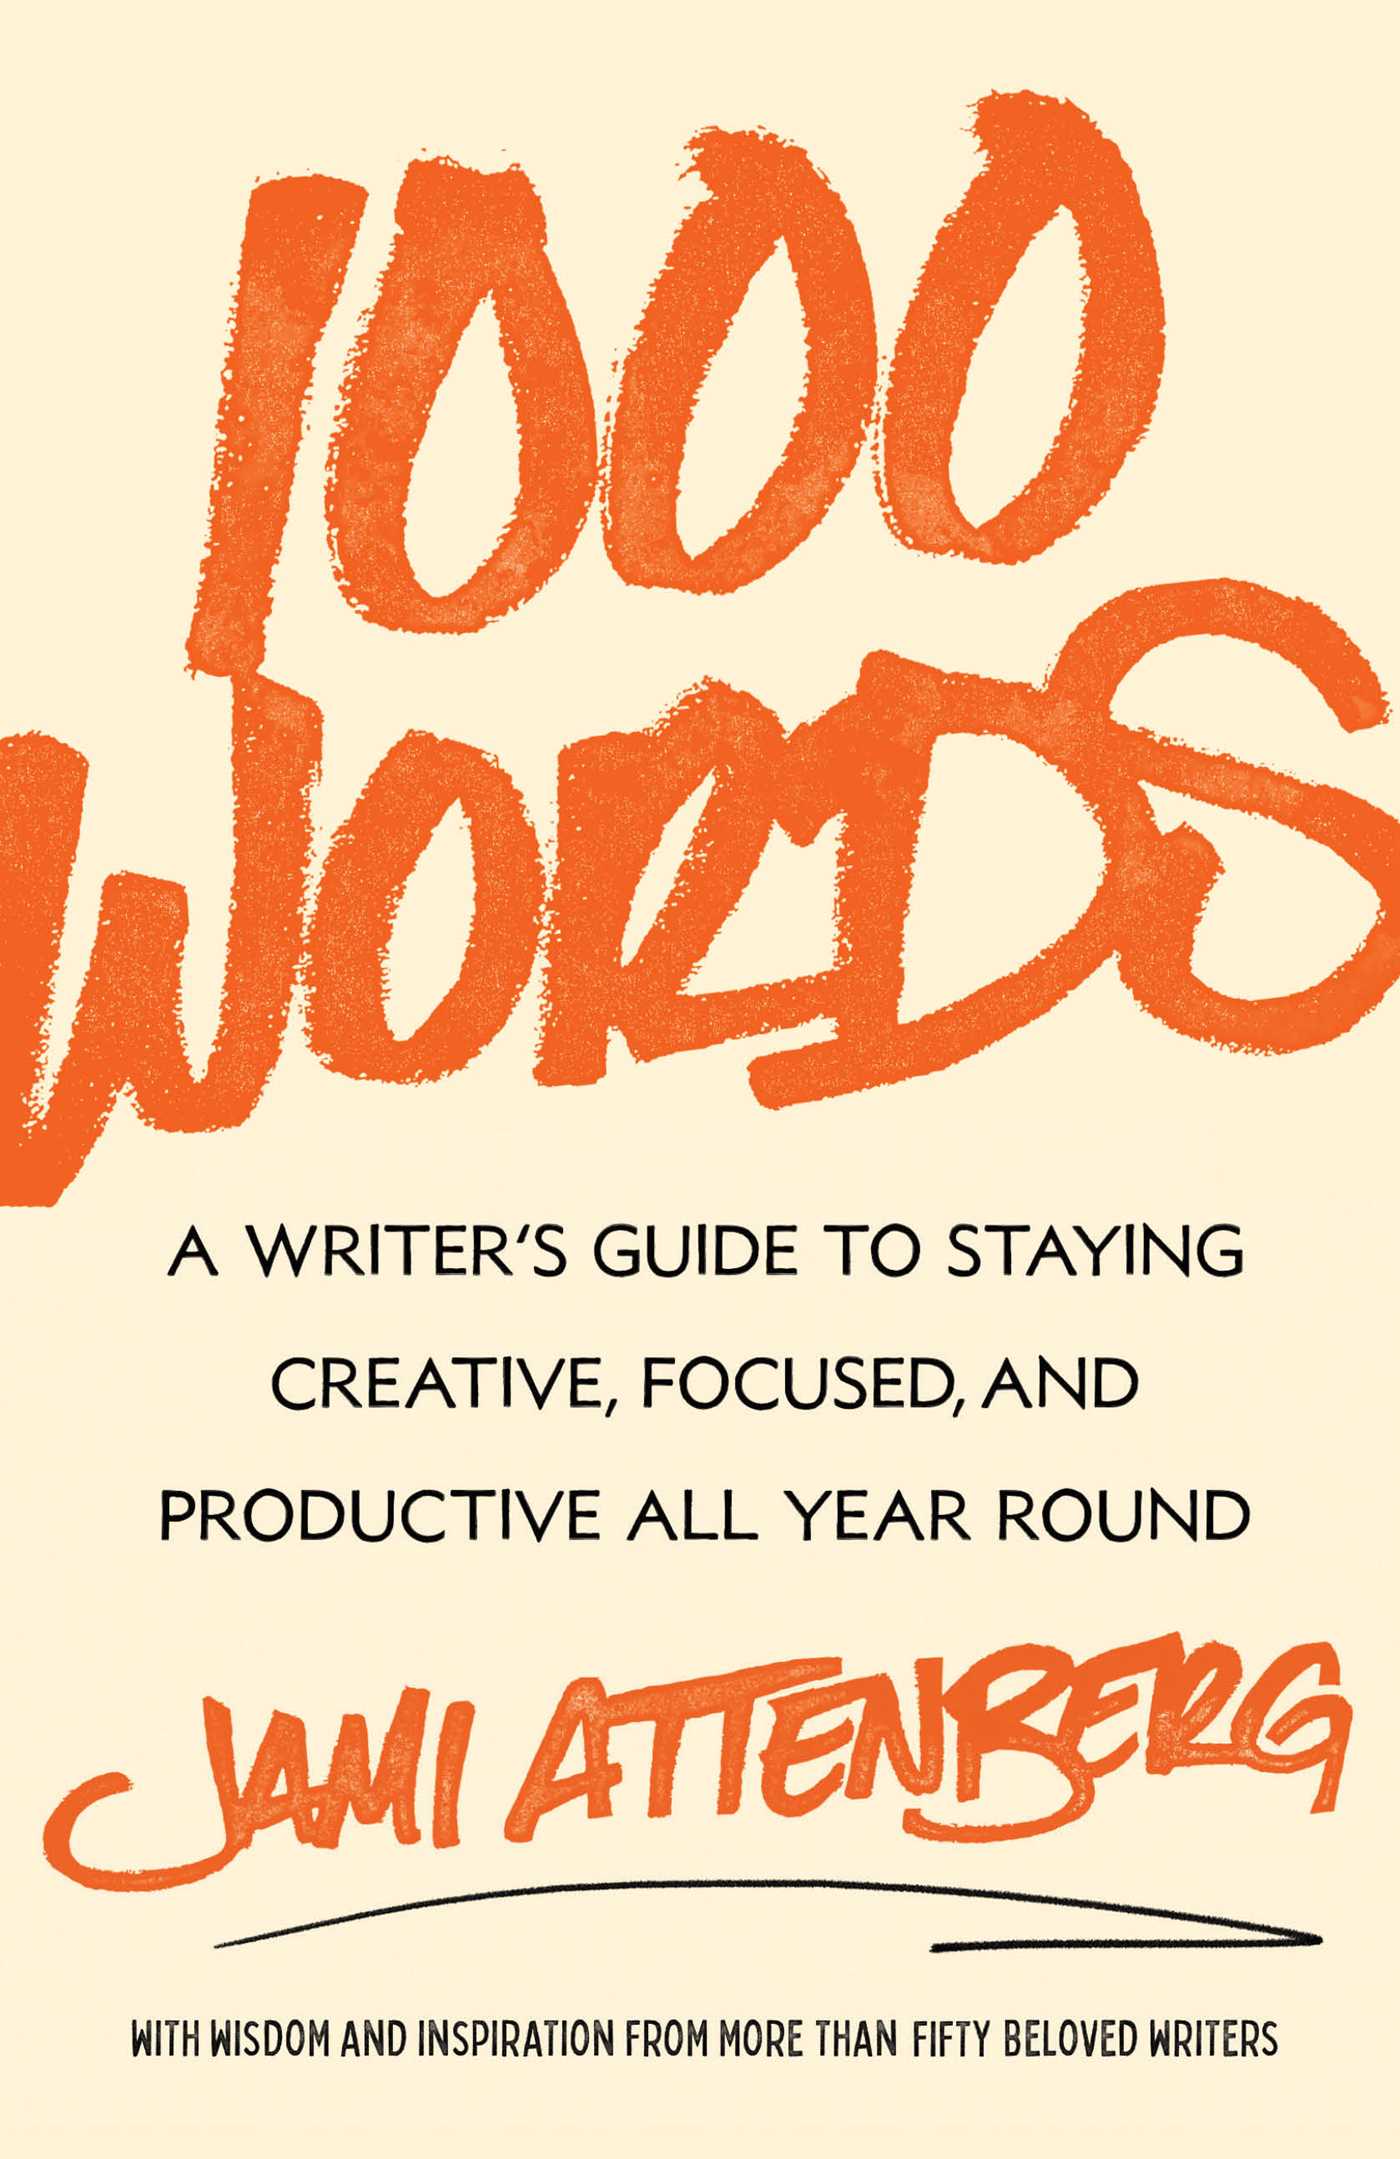 1000 Words A Writer's Guide to Staying Creative, Focused, and Productive All Year Round cover image